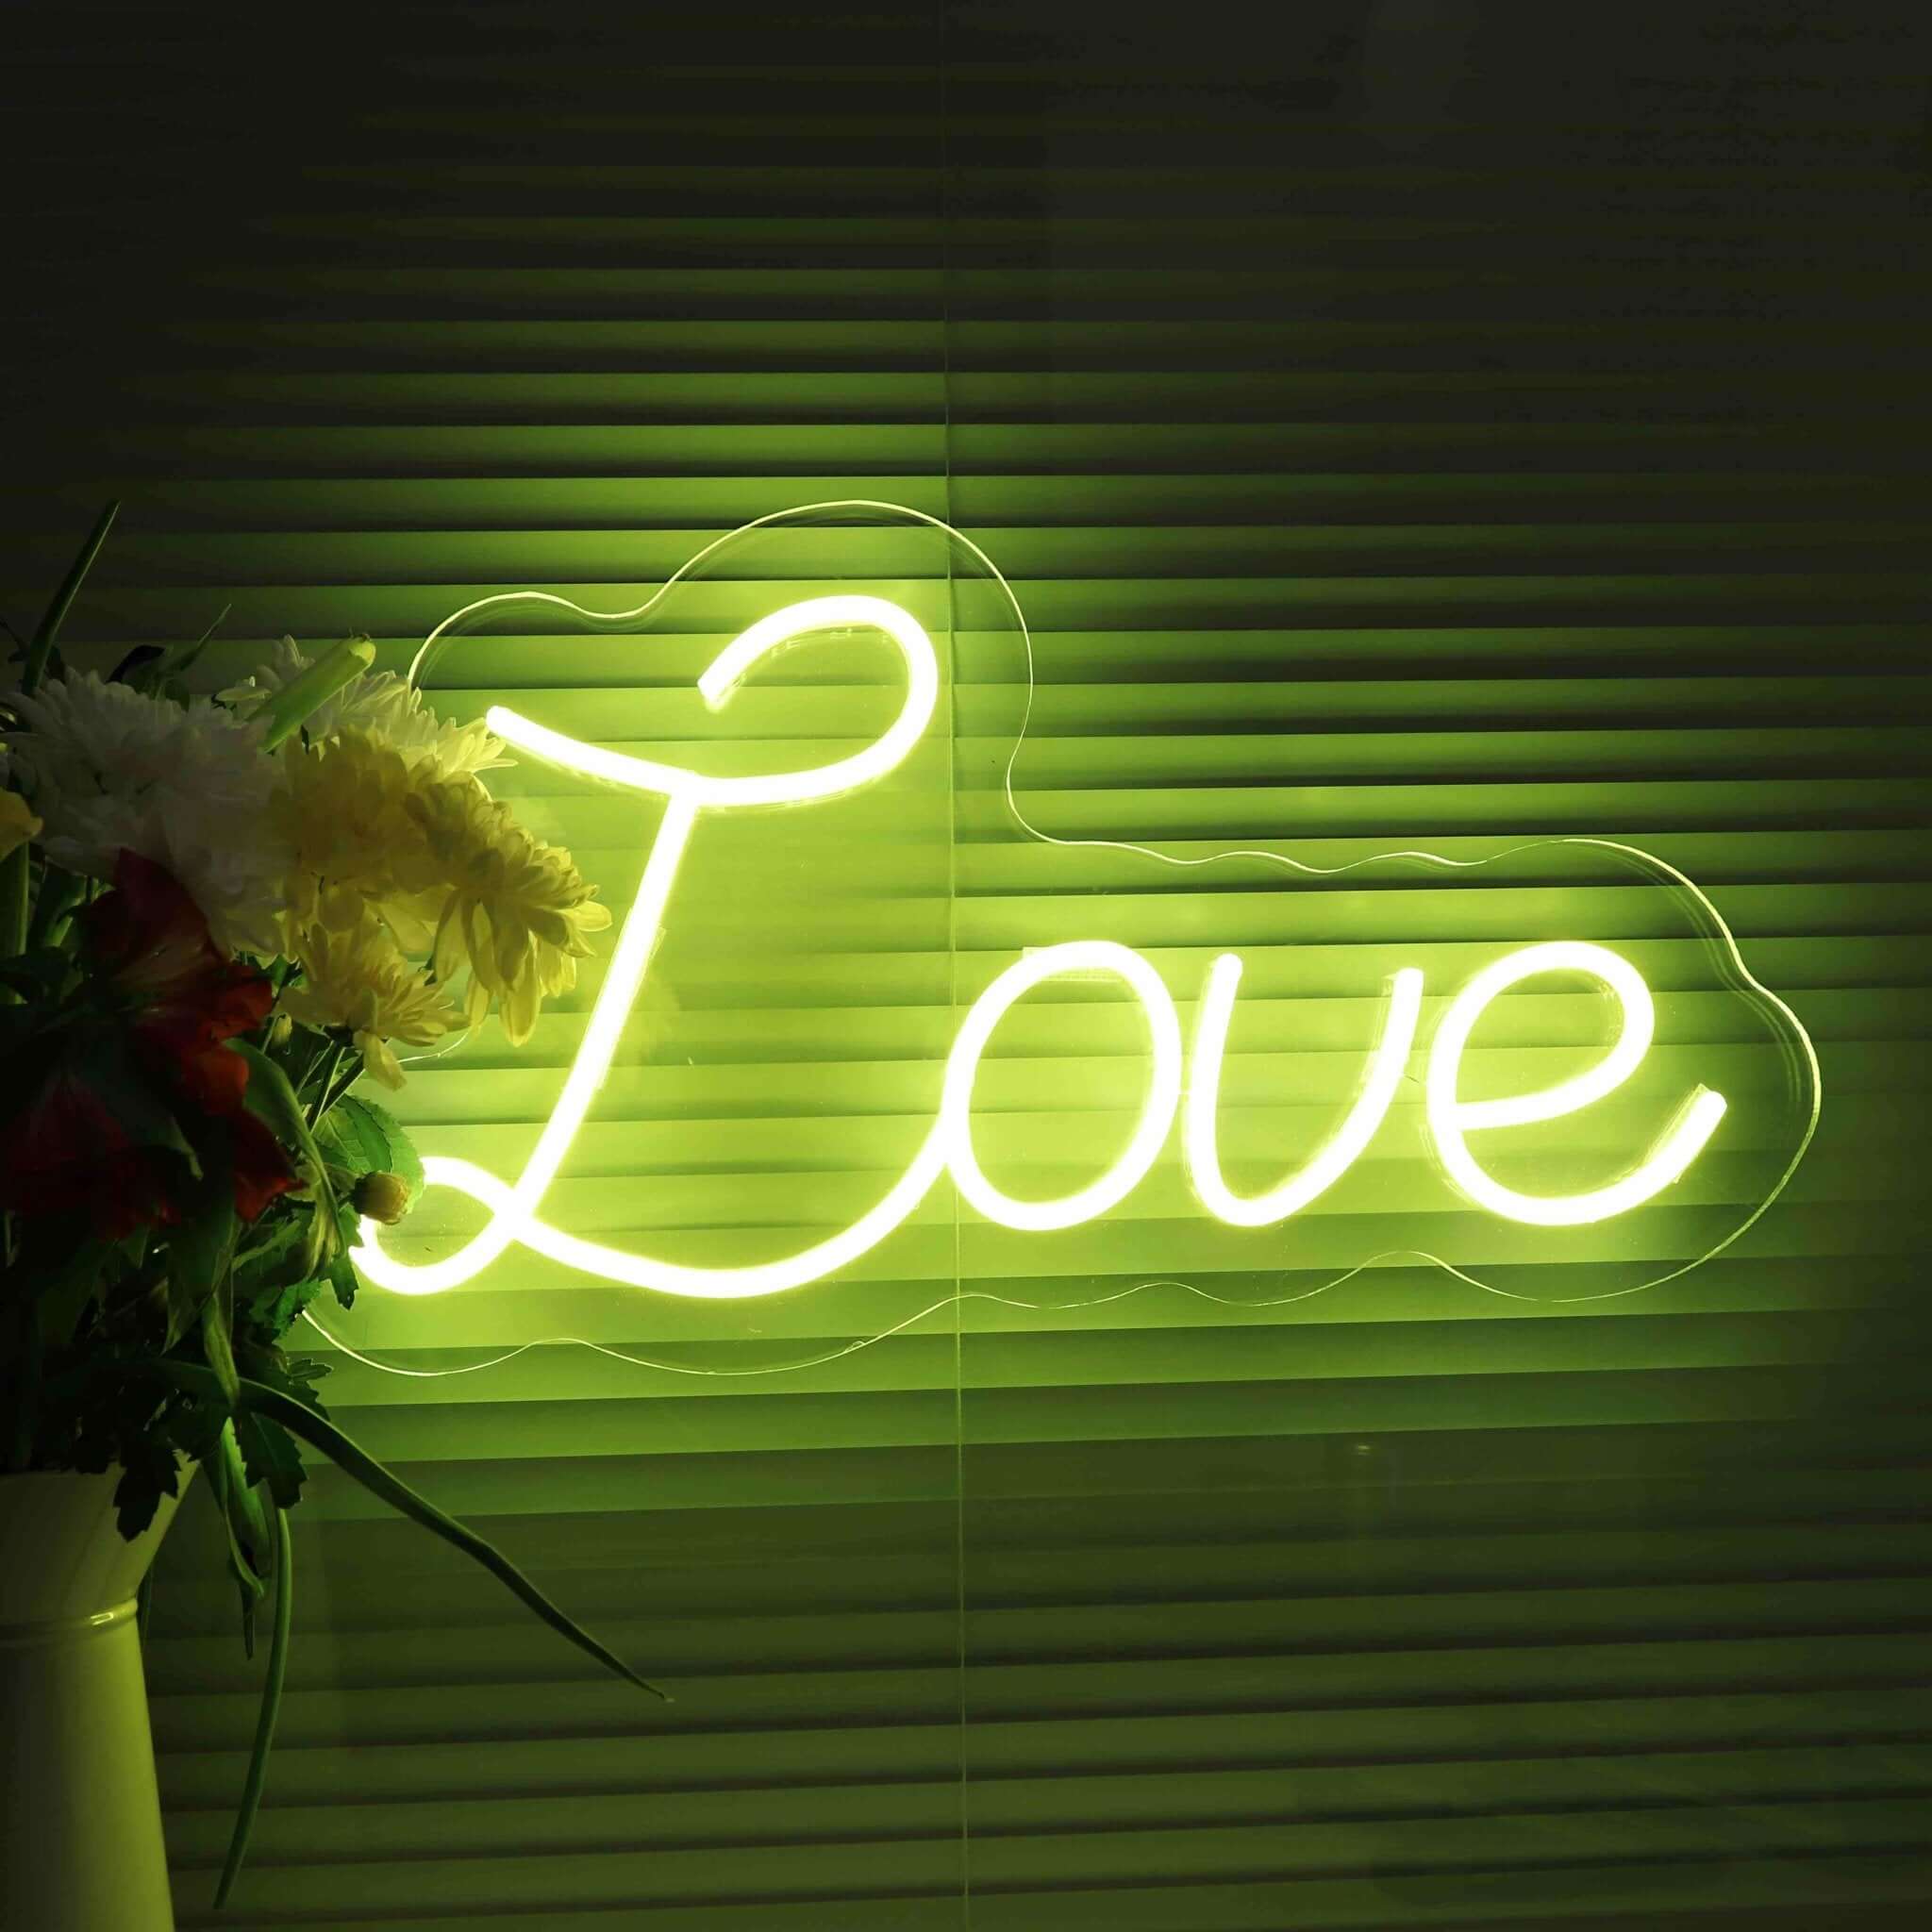 Shine a Light on Mother's Day: LED Neon Sign Gift Ideas to Make Mom's Day Brighter - Planet Neon